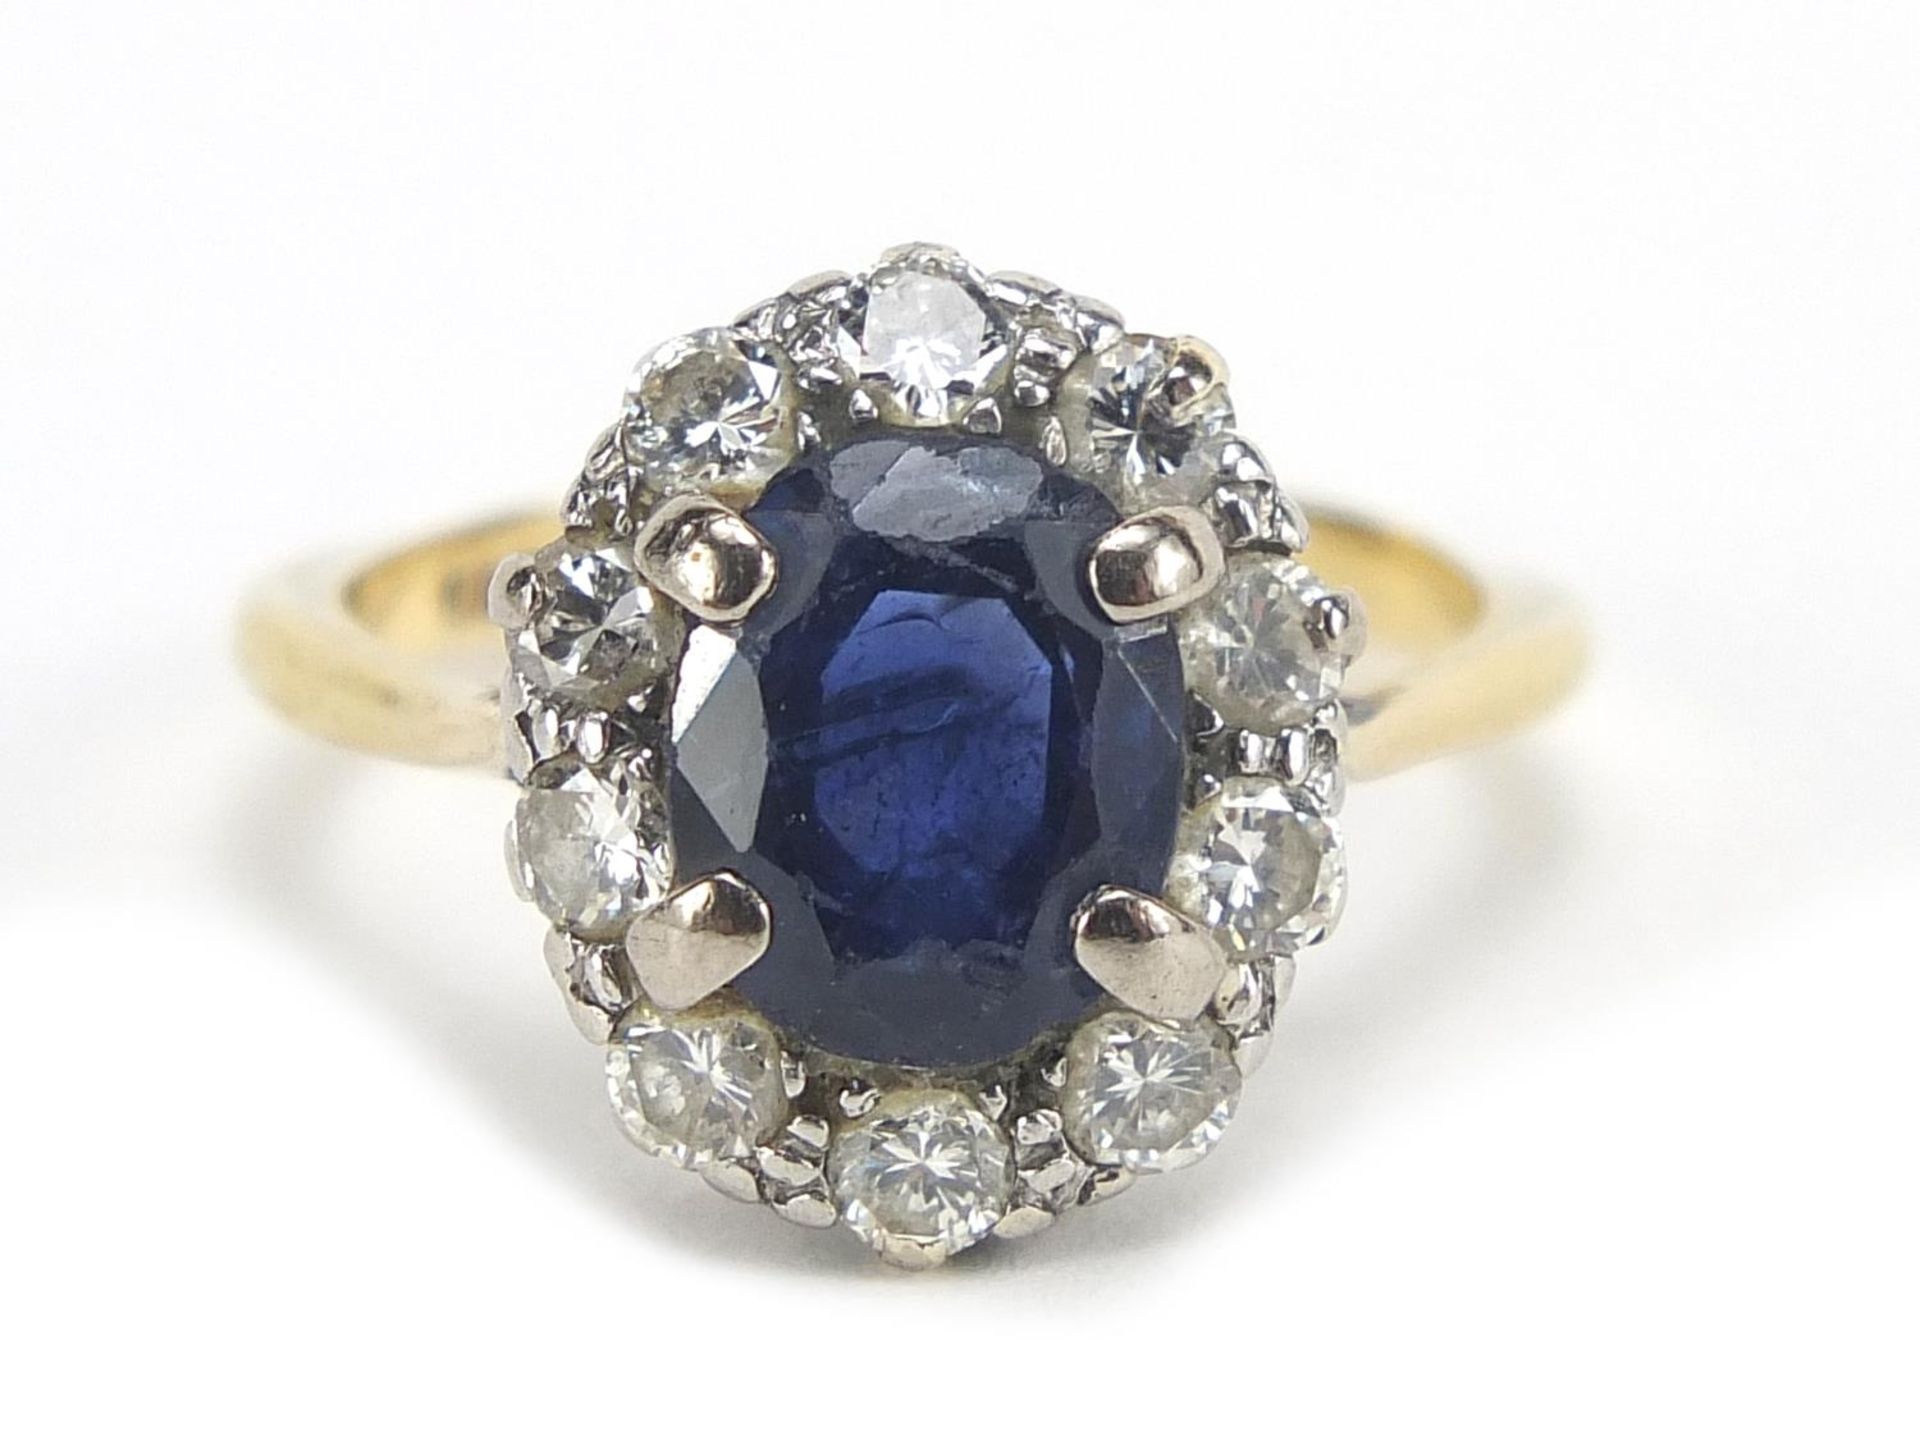 18ct gold sapphire and diamond ring, the sapphire approximately 8.5mm x 6.8mm, the diamonds